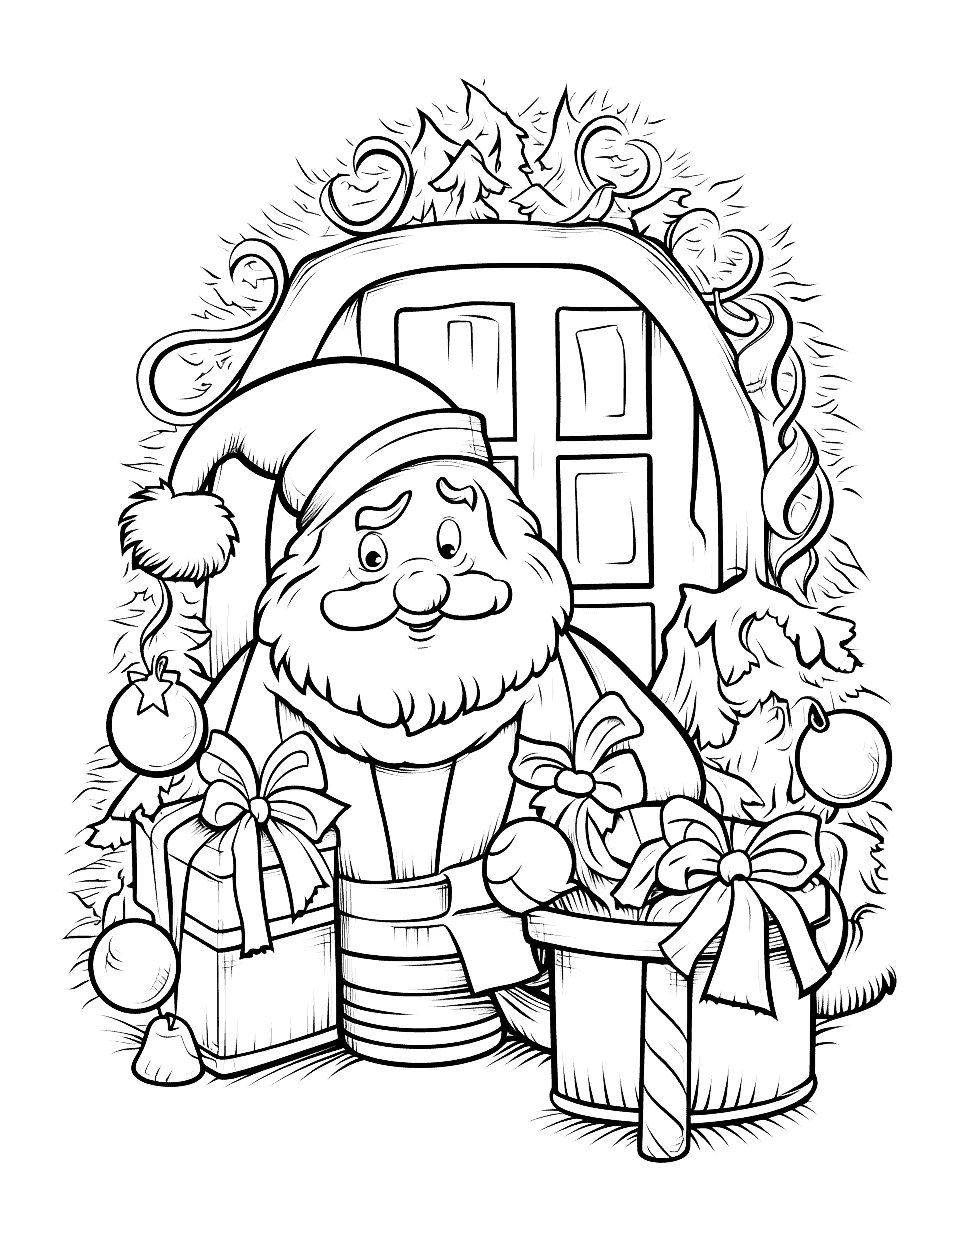 Santa's Workshop Christmas Coloring Page - A detailed look into Santa’s workshop with gifts and Christmas decorations.